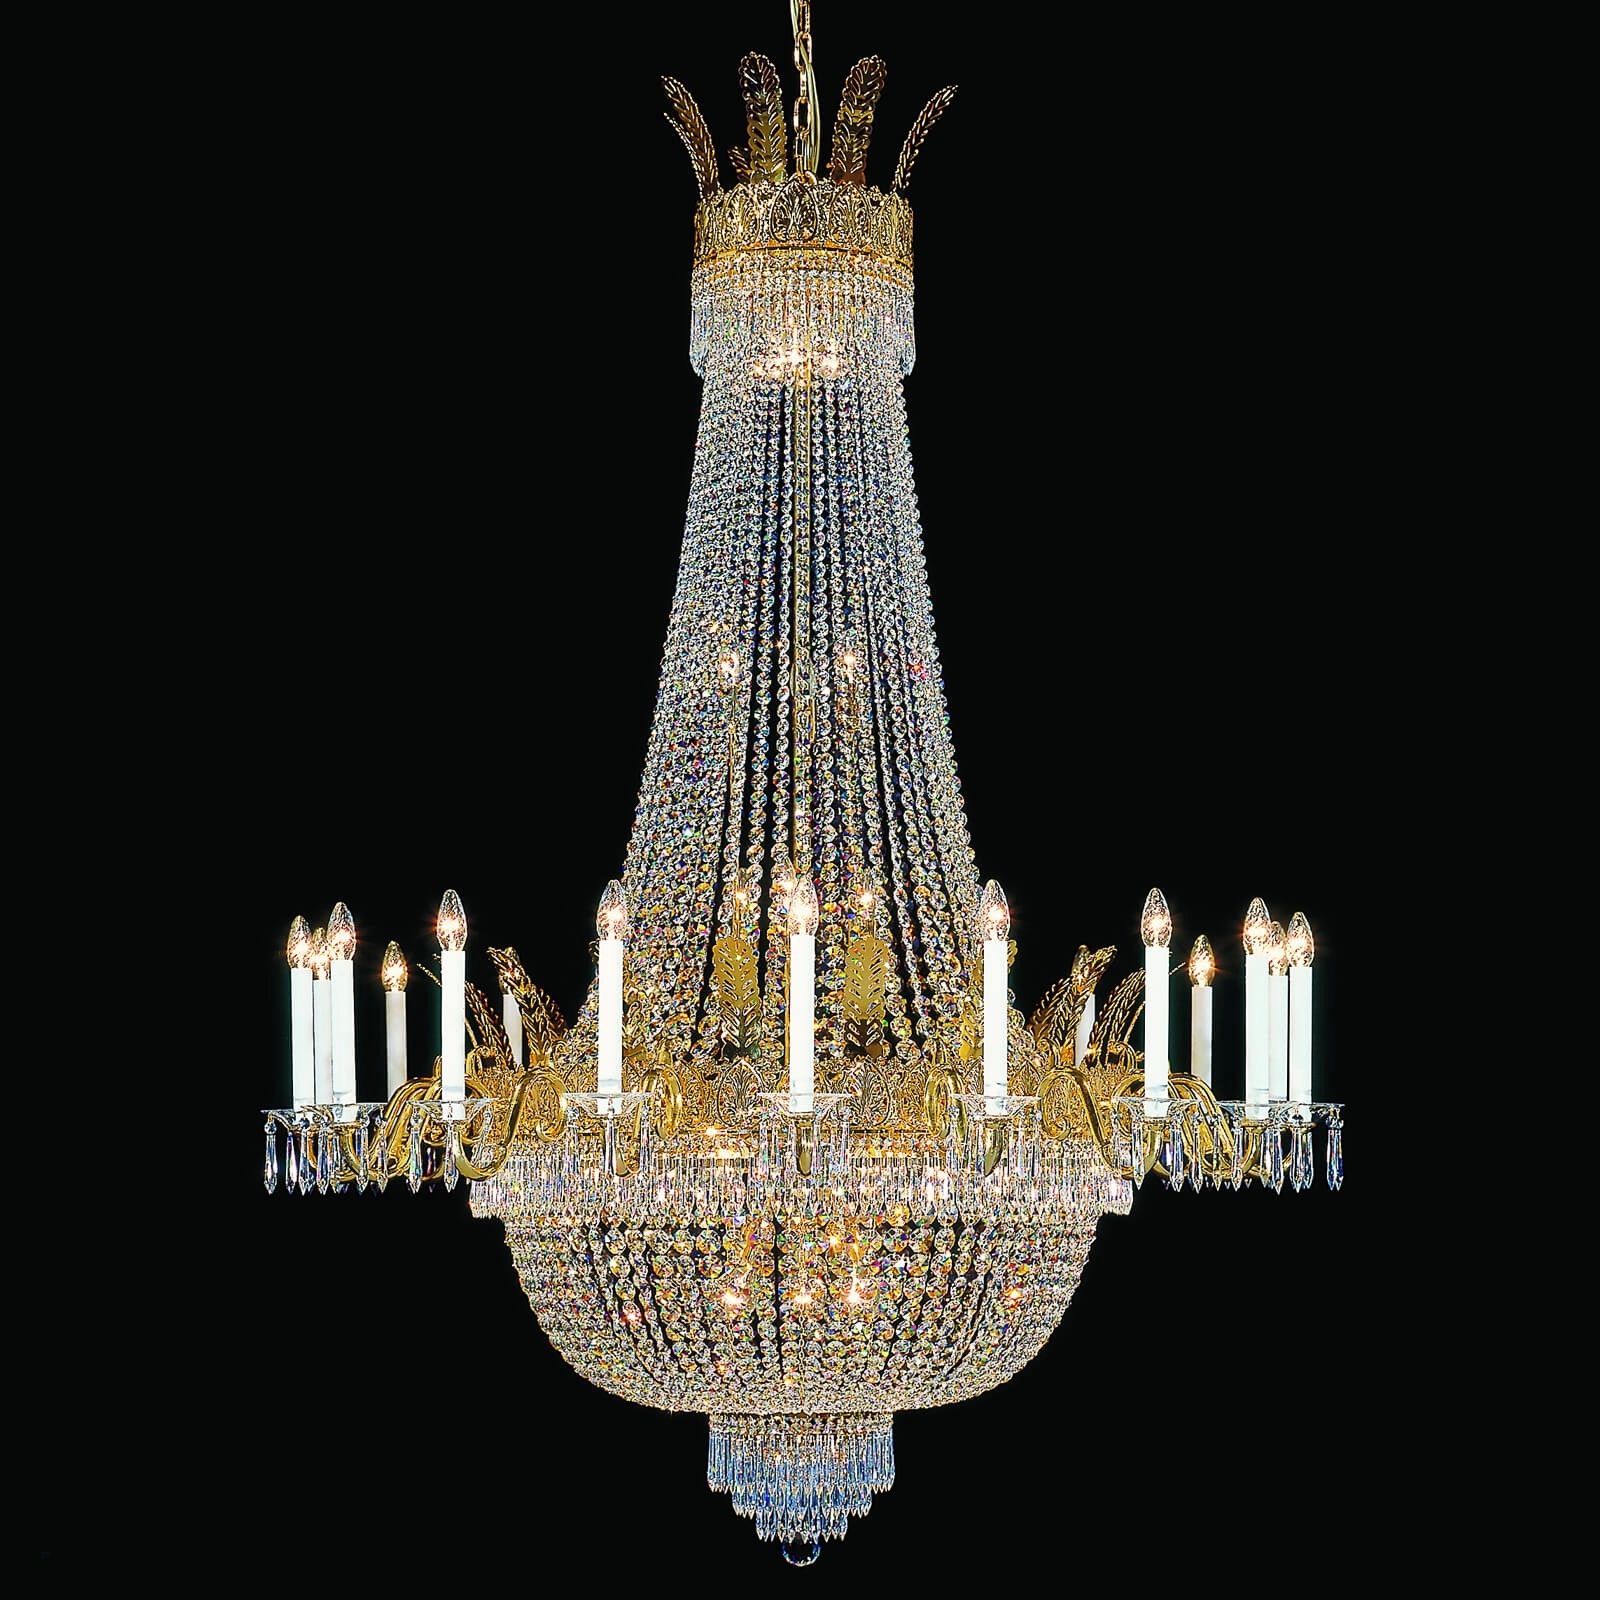 Big empire crystal chandeliers with long candles